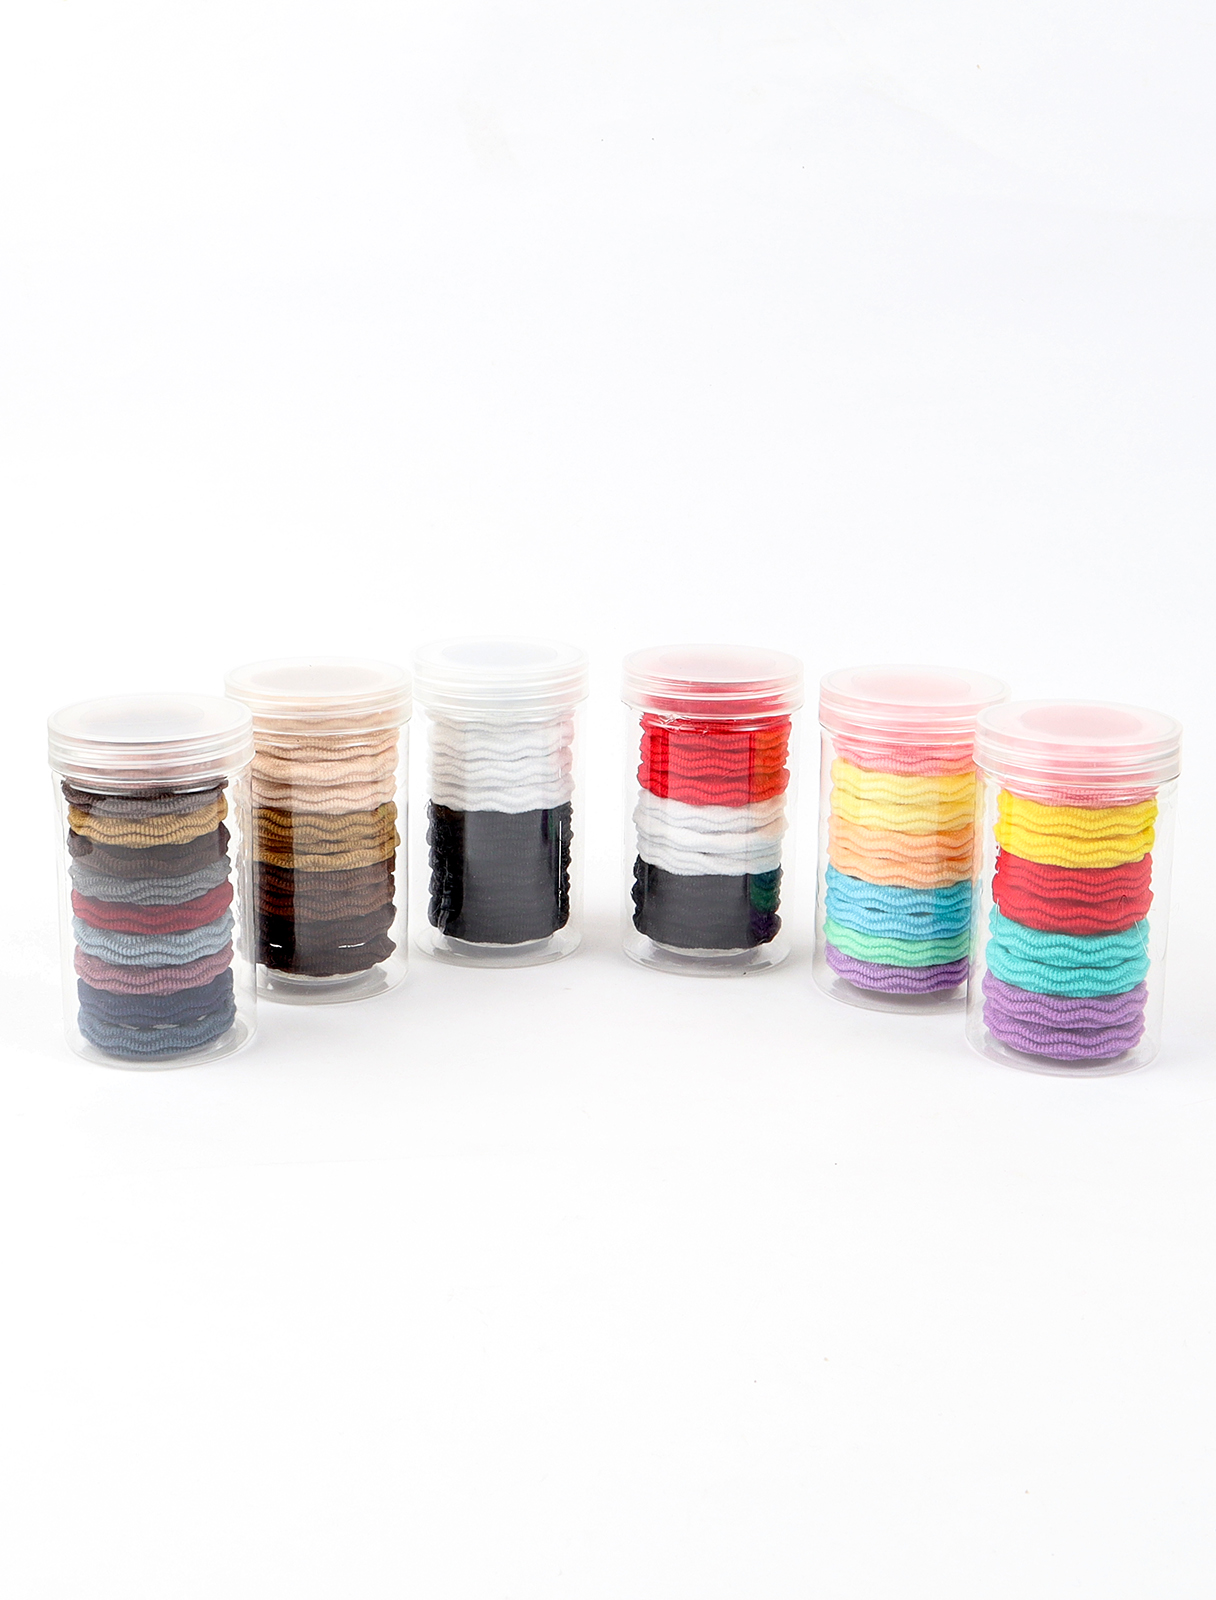 A box of 10-piece corrugated fabric hair ties